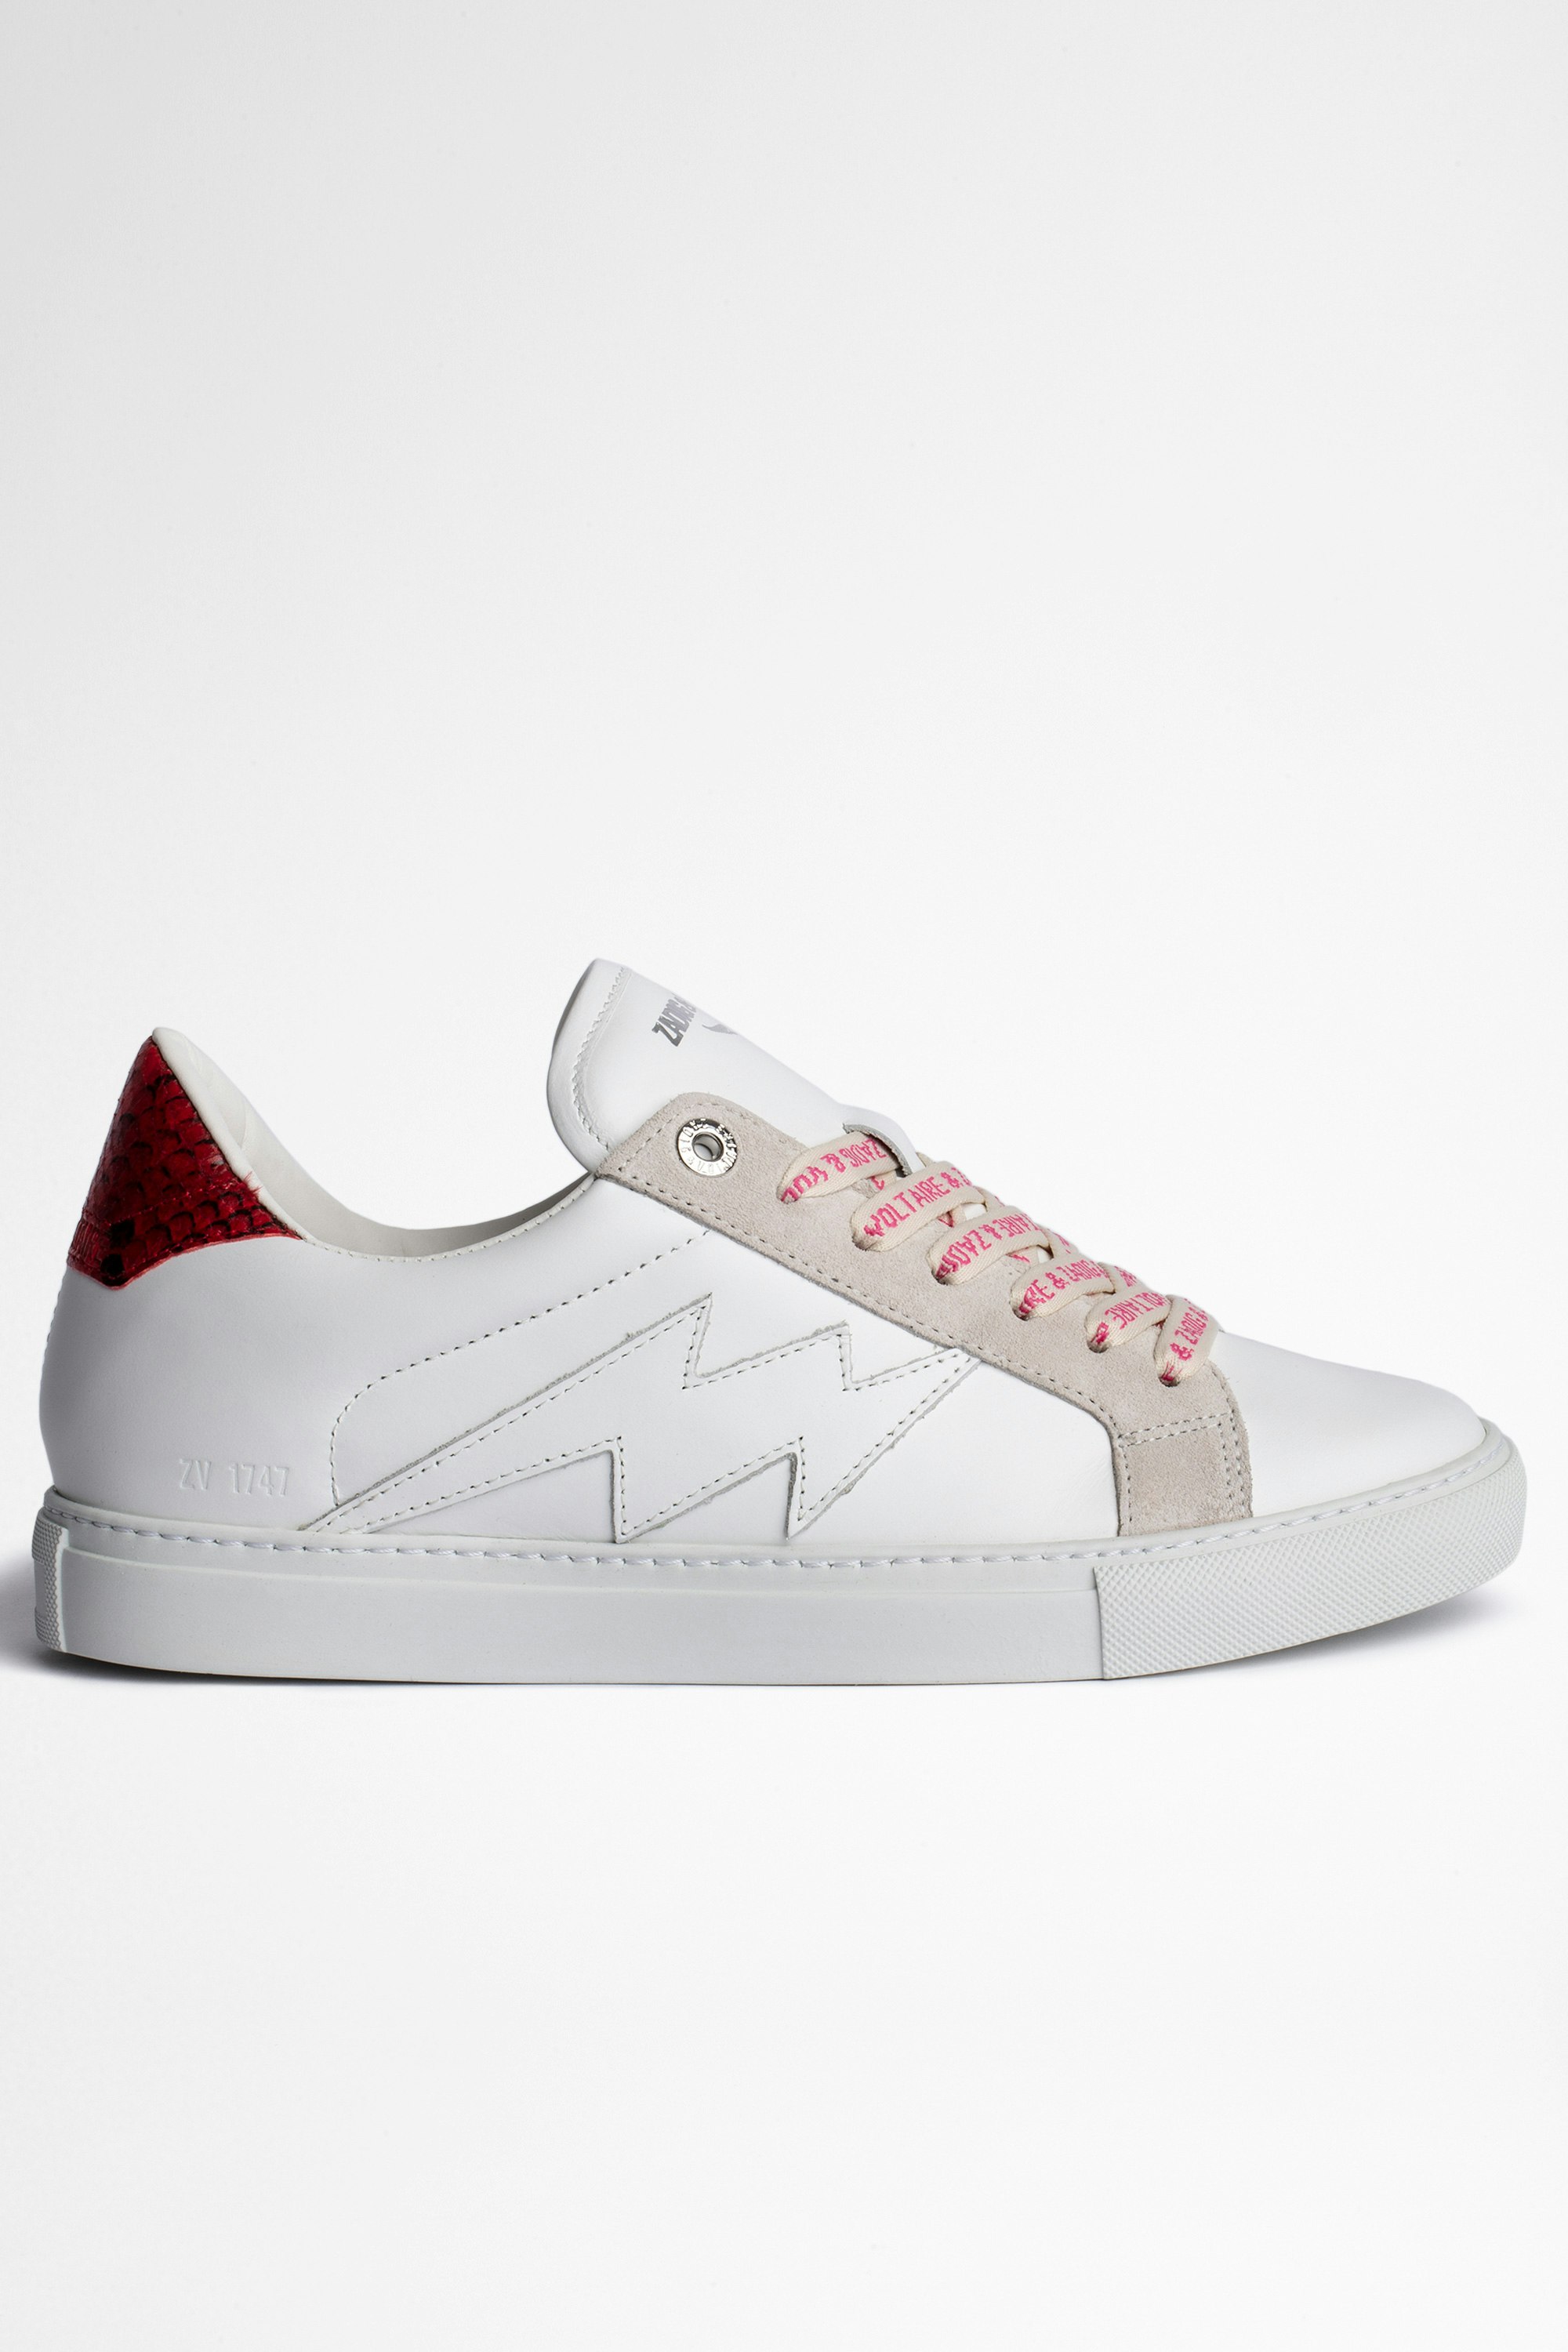 ZV1747 レザースニーカー Women's white leather trainers with lightning bolt patches